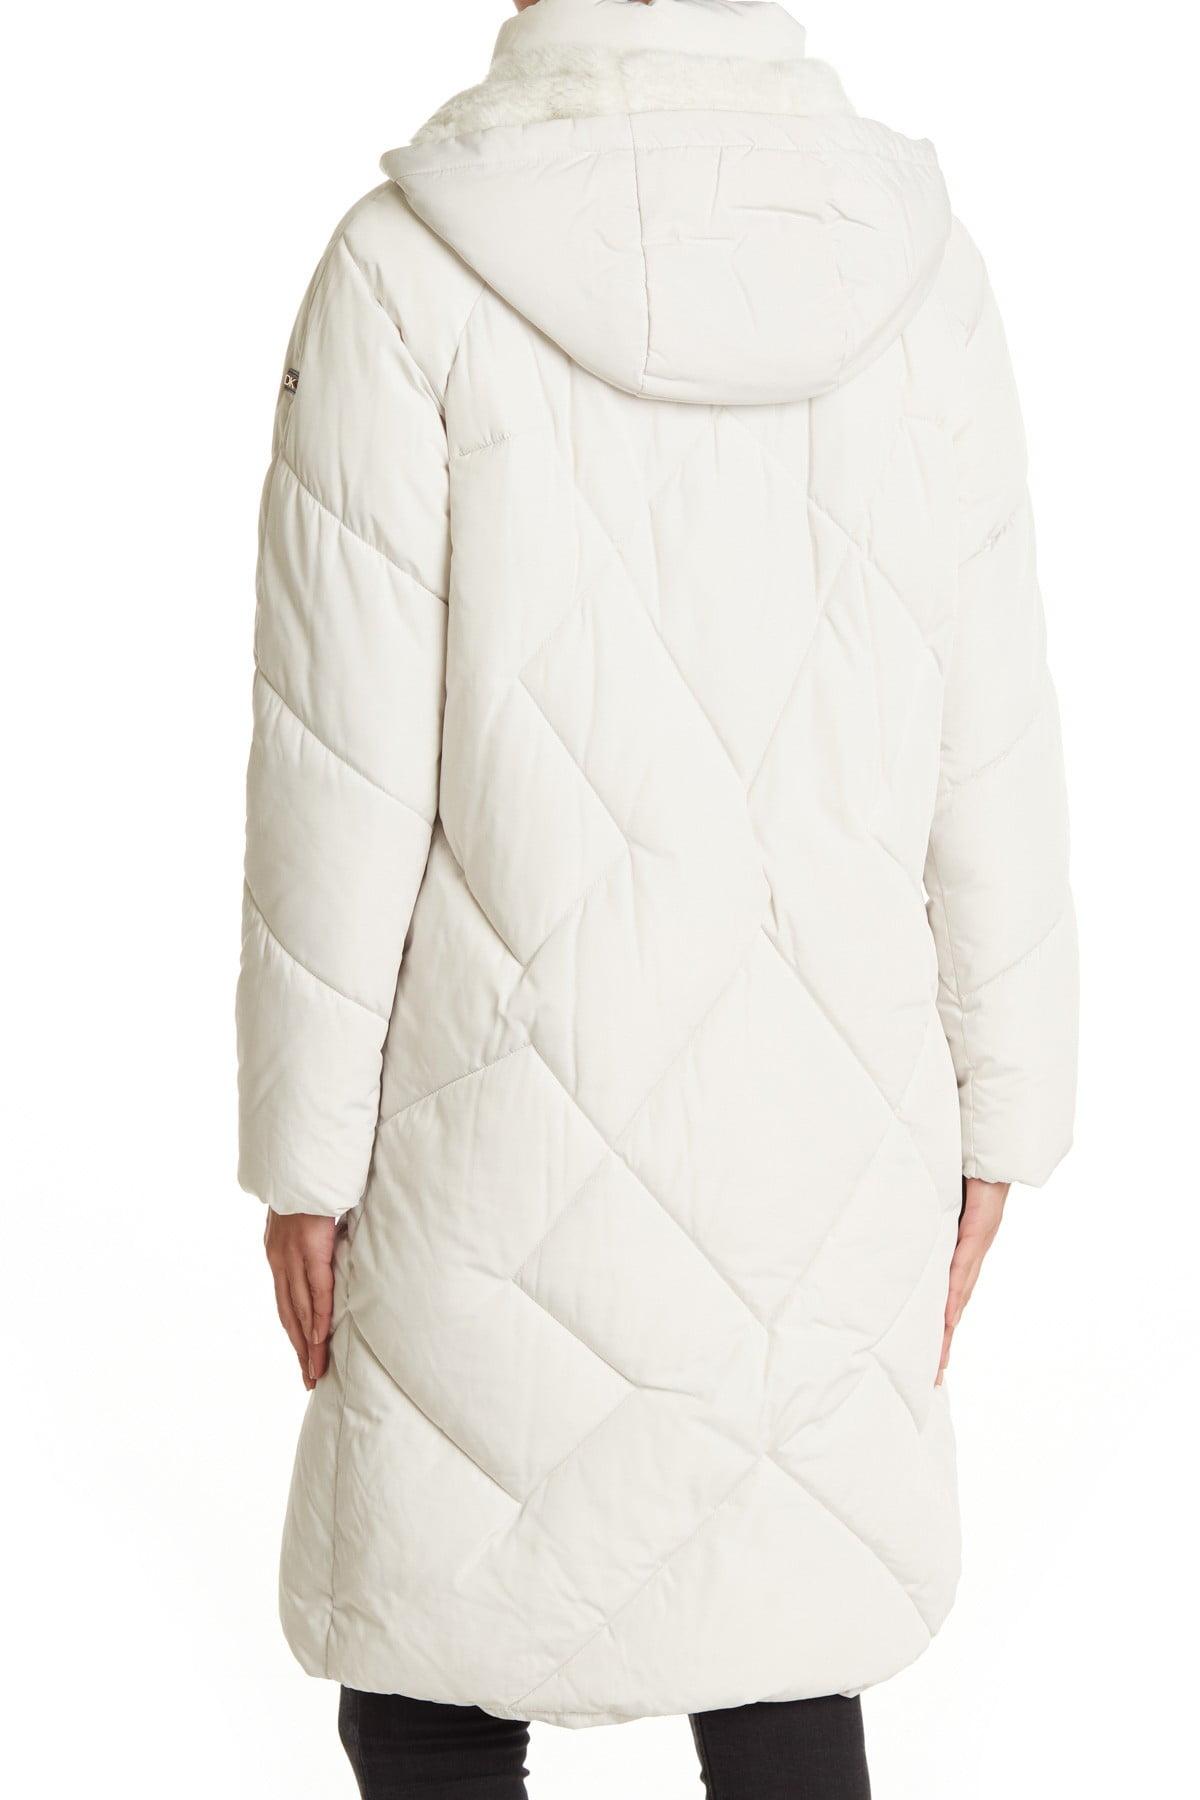 Donna Karan Faux Fur Lined Hood Zip Cocoon Puffer Jacket in Natural - Lyst